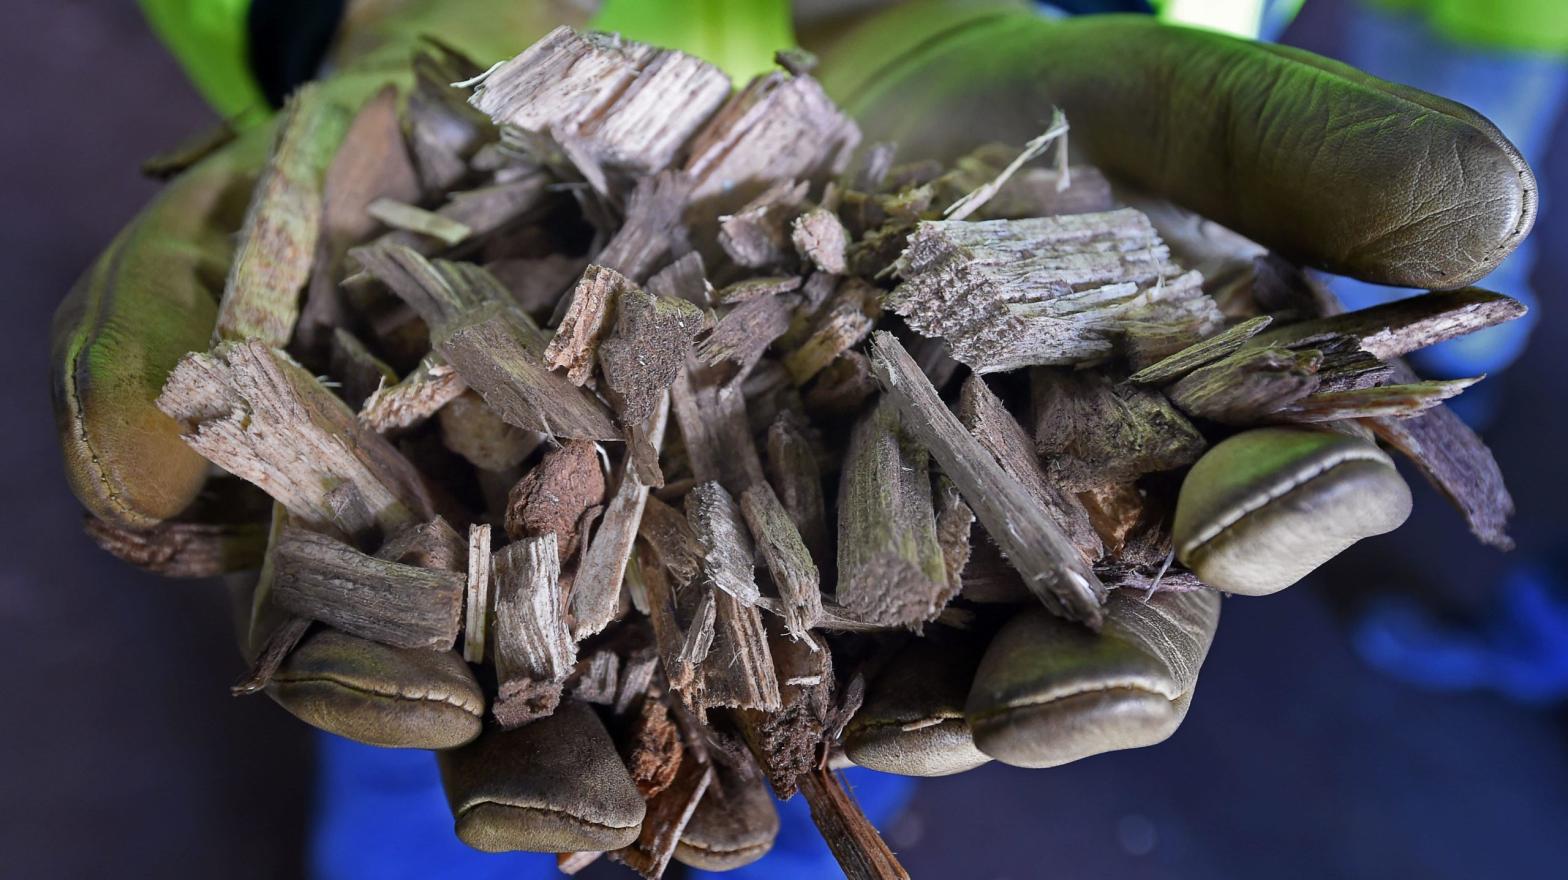 Wood pellets to be burned in a biomass-powered plant. (Photo: Boris Horvat, Getty Images)